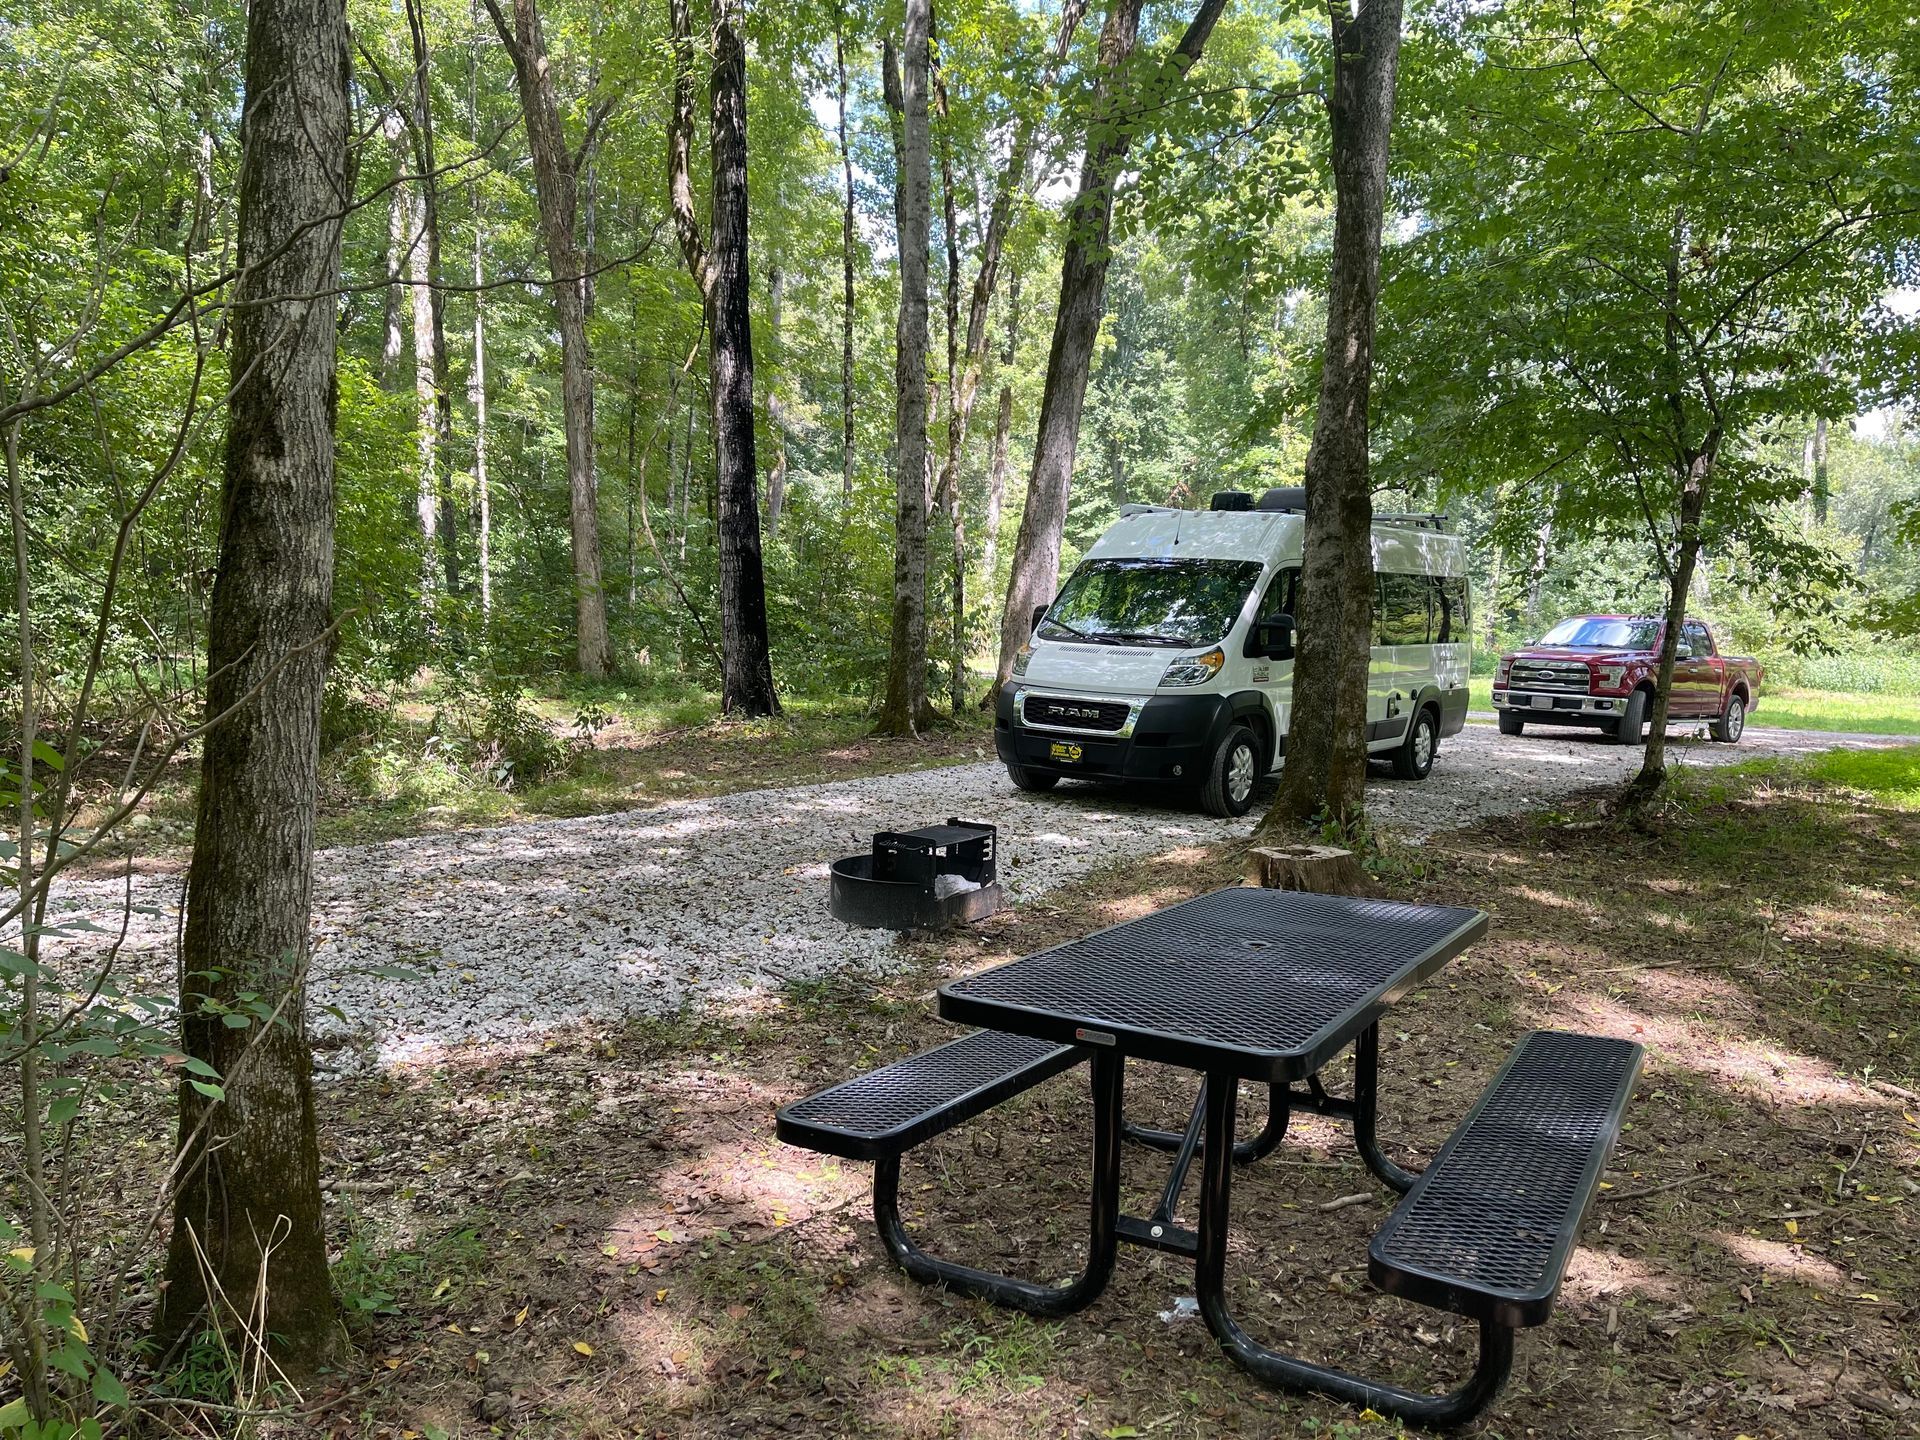 A white van is parked next to a picnic table in the woods.